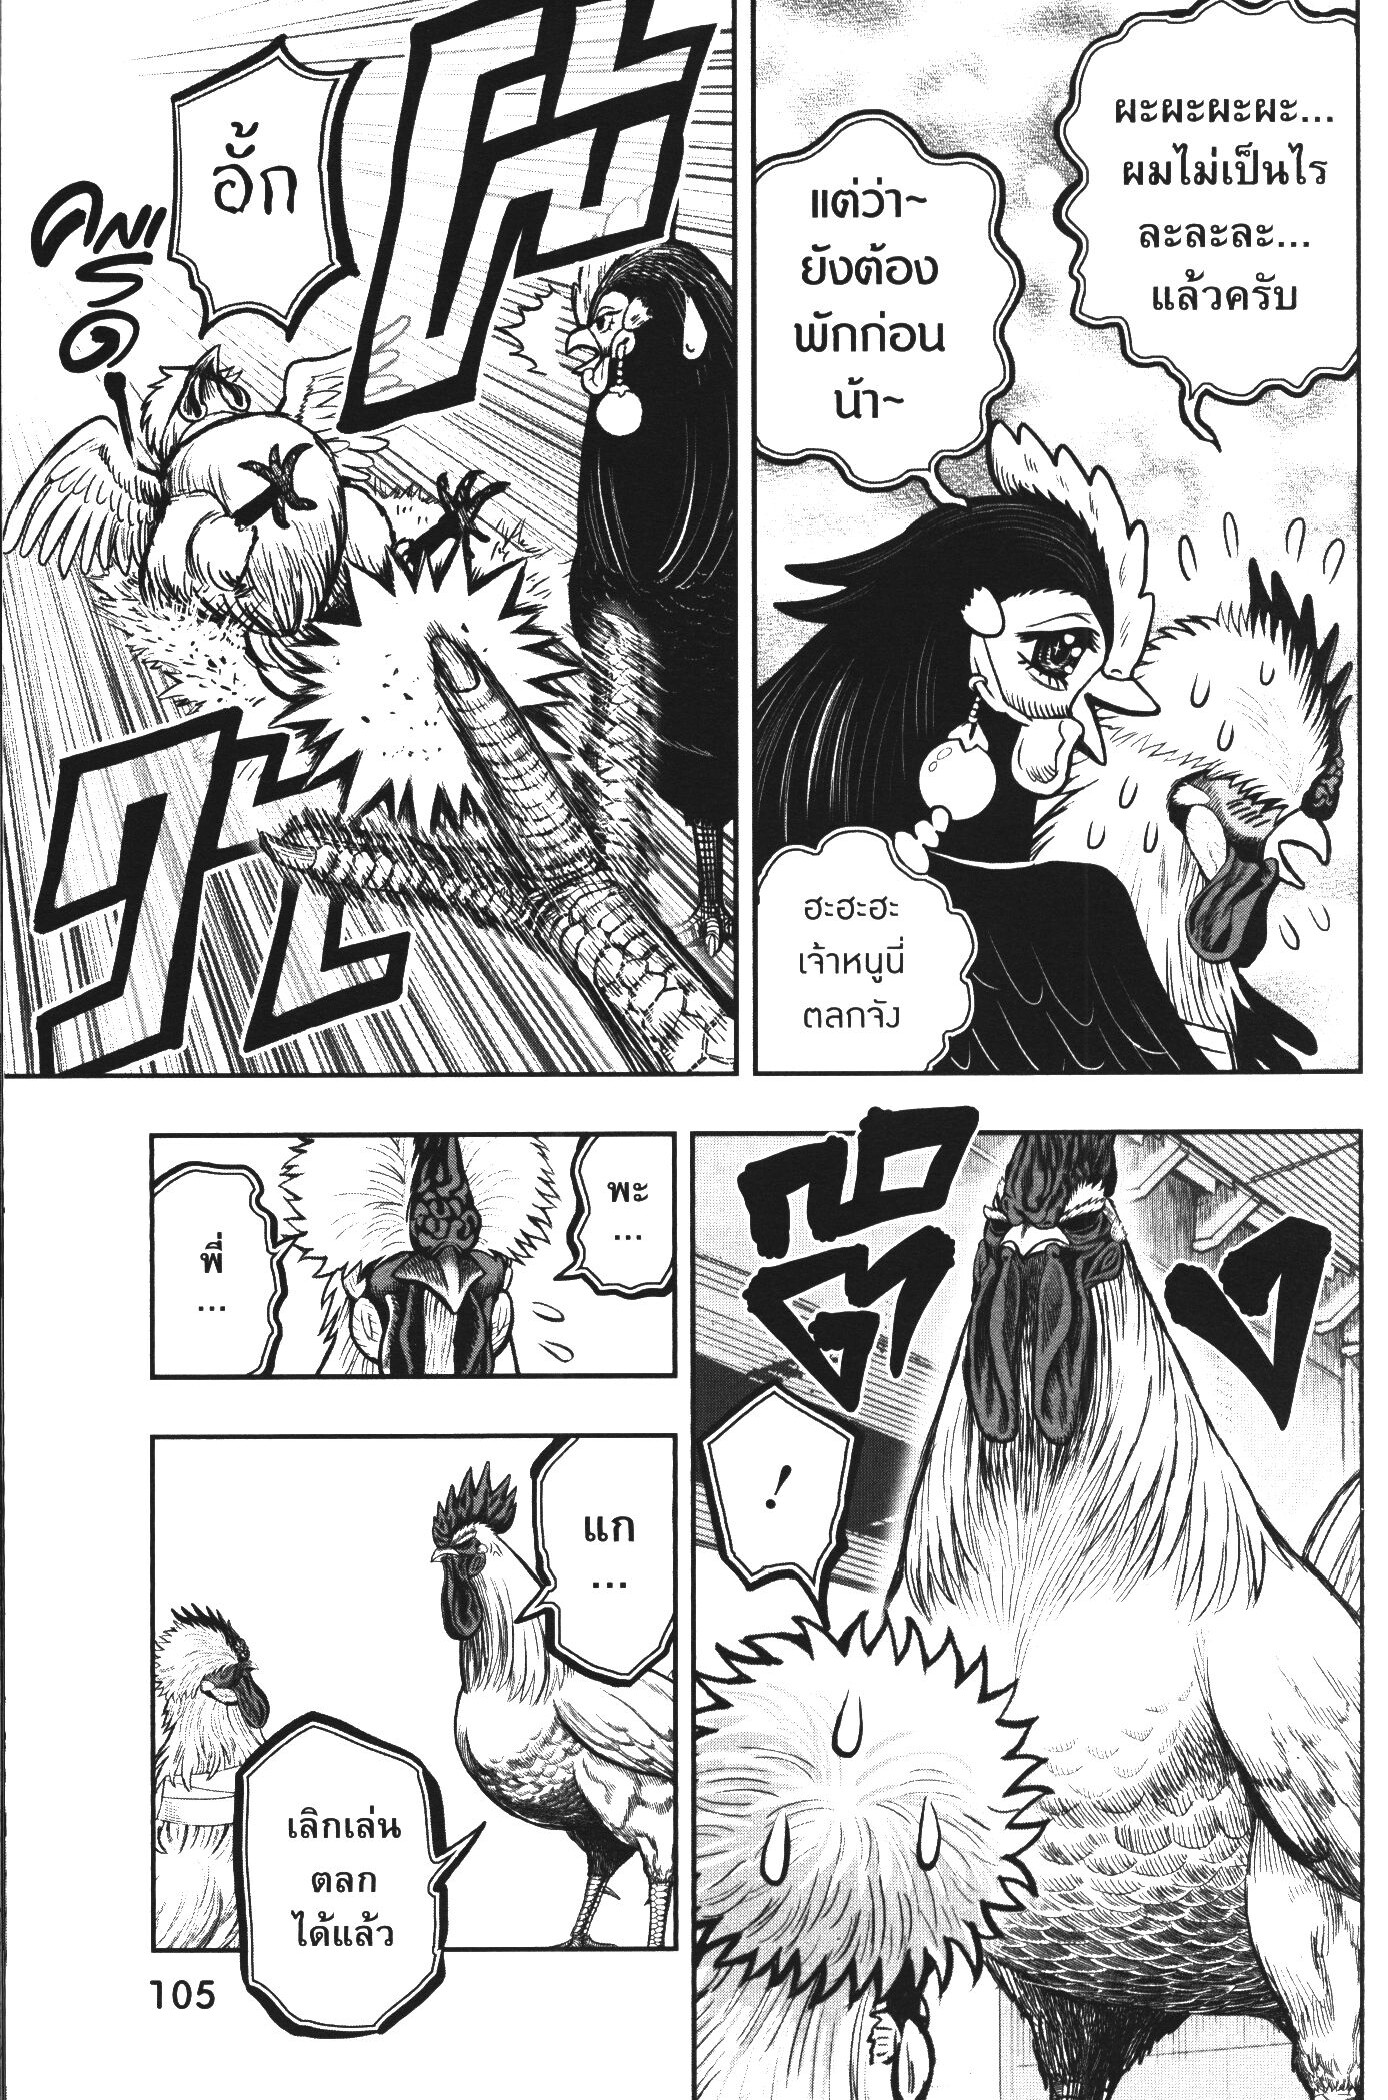 Rooster Fighter 19 (7)